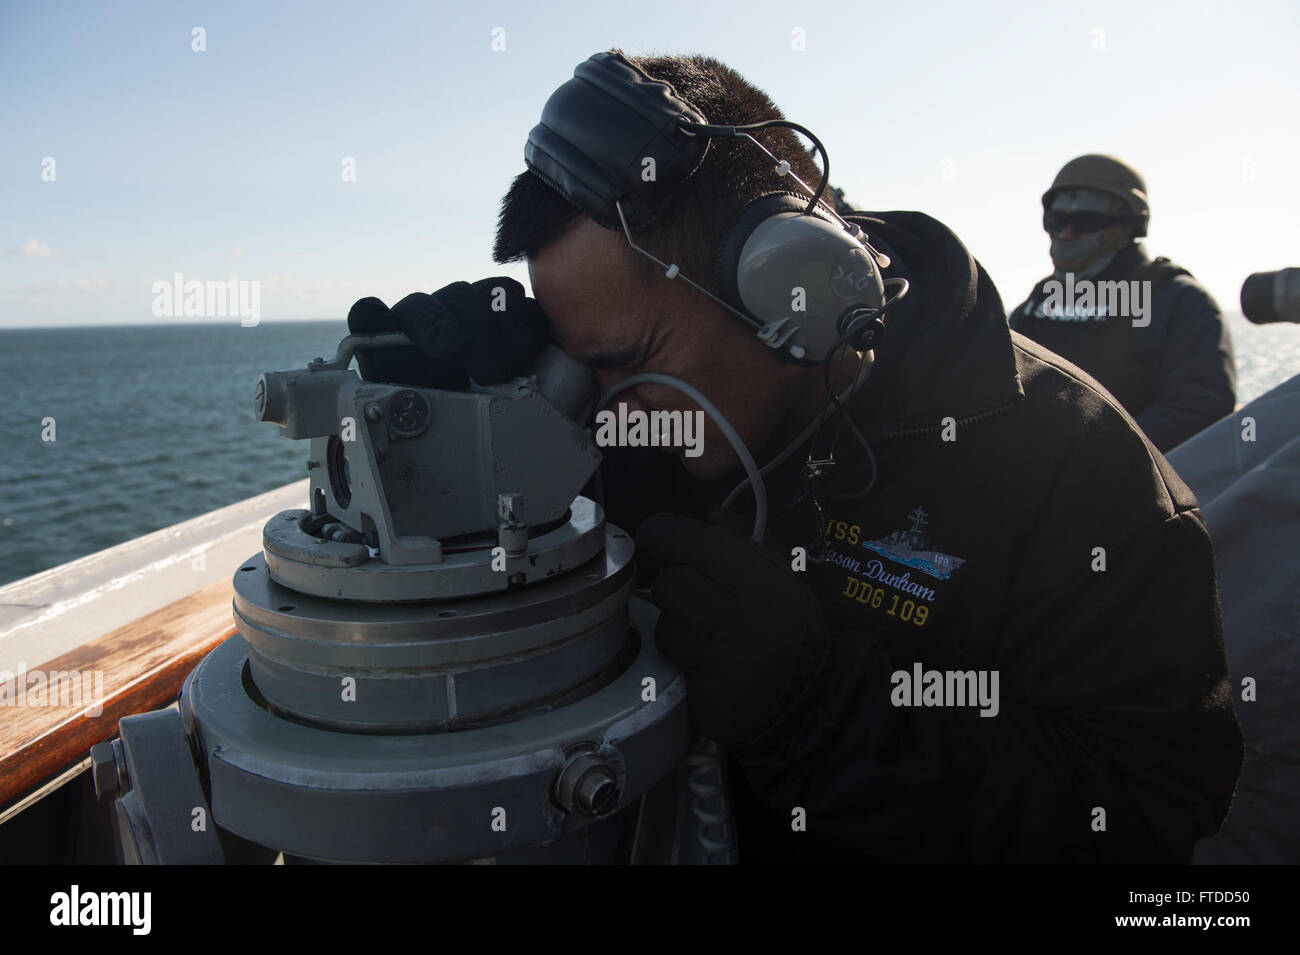 150604-N-ZE250-043 GDYNIA, Poland (June 4, 2015) Quartermaster 2nd Class Francis Mengote, from San Diego uses a telescopic alidade to take bearings aboard USS Jason Dunham (DDG 109) while pulling into port in Gdynia, Poland June 4, 2015. Jason Dunham, an Arleigh Burke-class guided-missile destroyer, homeported in Norfolk, is participating in BALTOPS 2015. BALTOPS is an annually recurring multinational exercise designed to enhance flexibility and interoperability, as well as demonstrate resolve of allied and partner forces to defend the Baltic region. (U.S. Navy photo by Mass Communication Spec Stock Photo